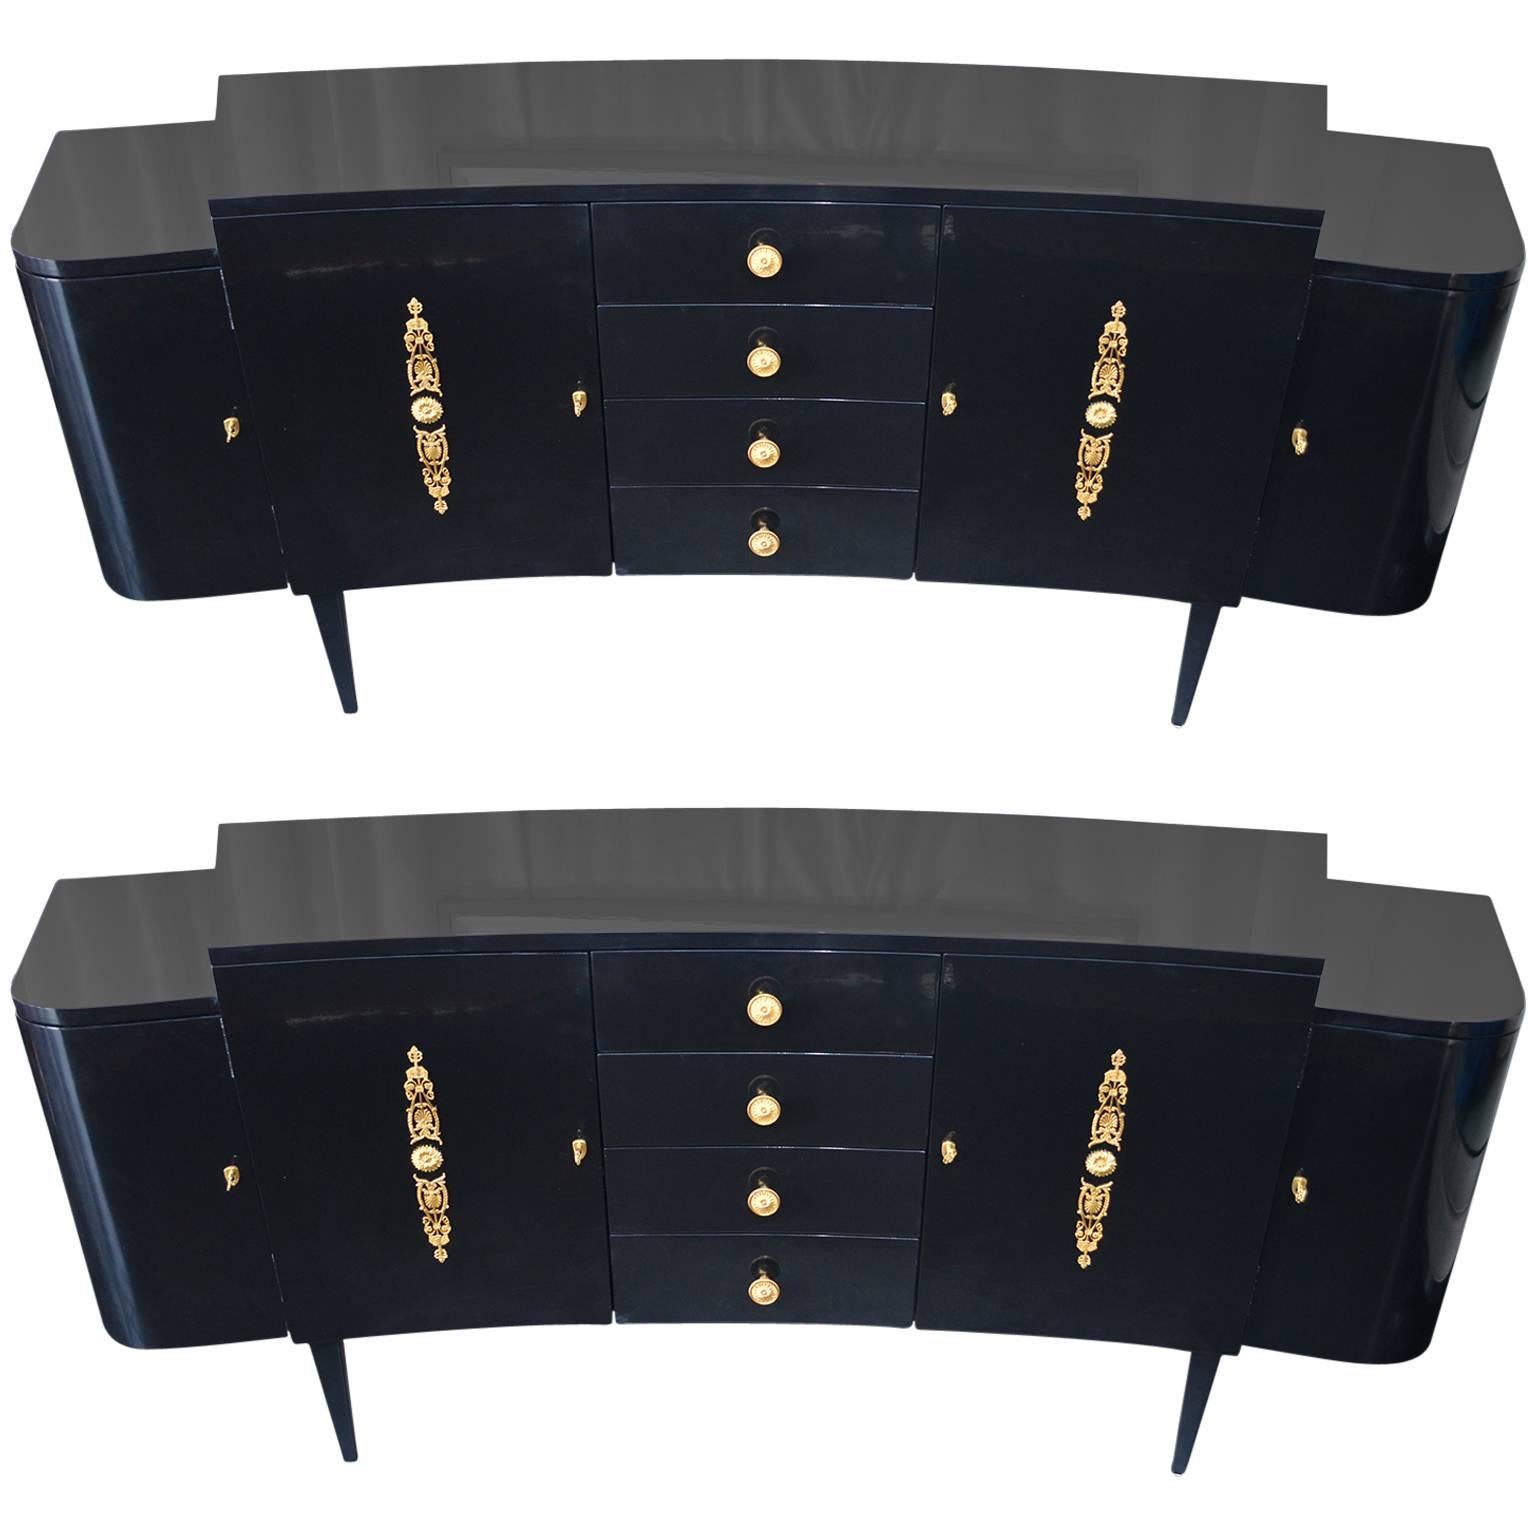 Pair of Black Lacquer Commodes by Kelly Wearstler